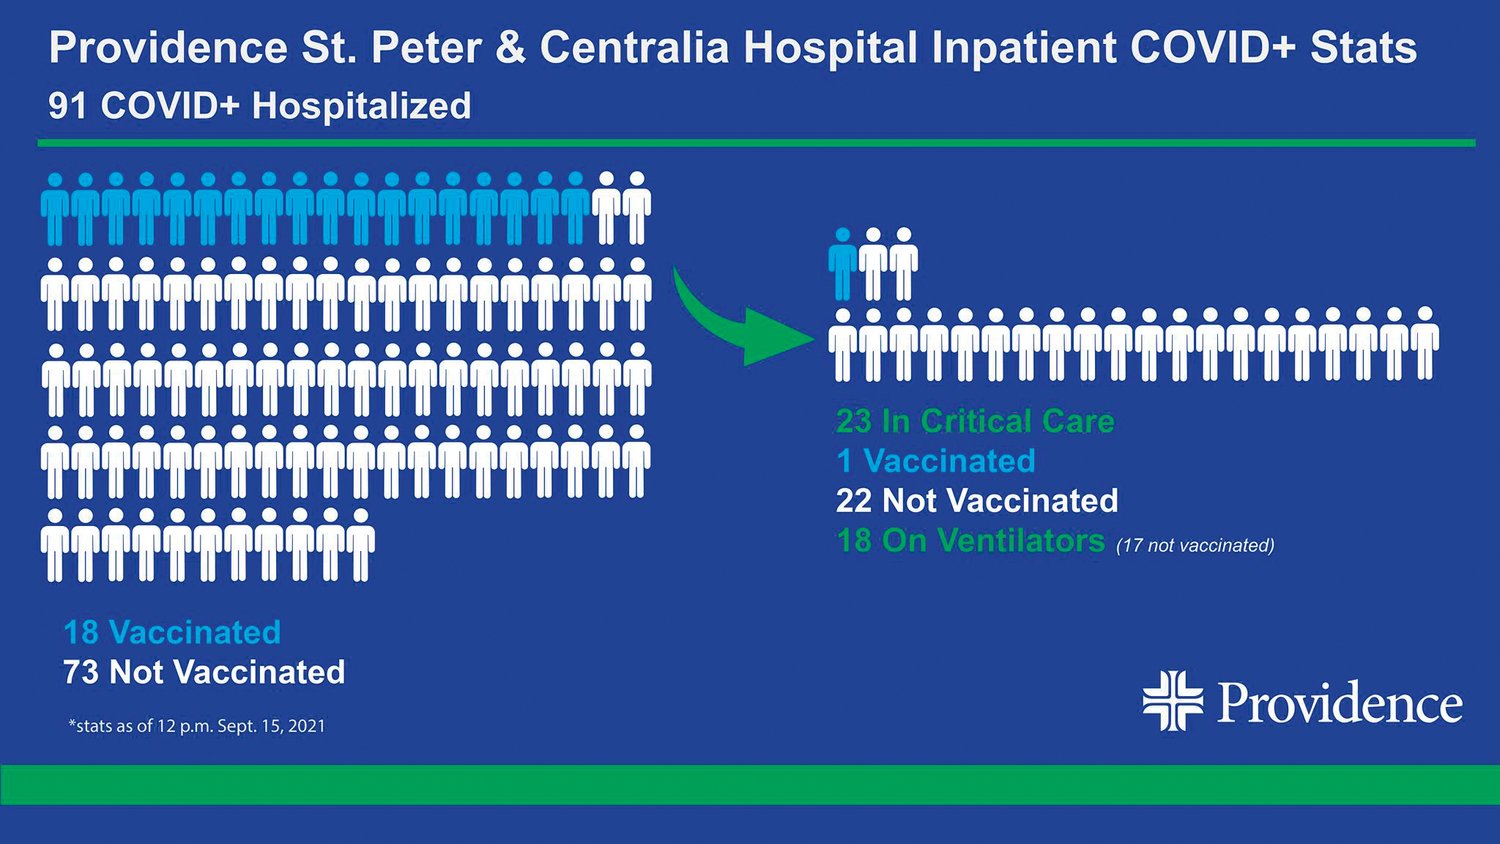 On Thursday, the two hospitals released an update on their COVID-19 patients. Of the 91 people hospitalized for the virus, 73 were not fully vaccinated. Of the 23 in critical care, 22 were not vaccinated. And of the 18 on ventilators, 17 were not vaccinated.